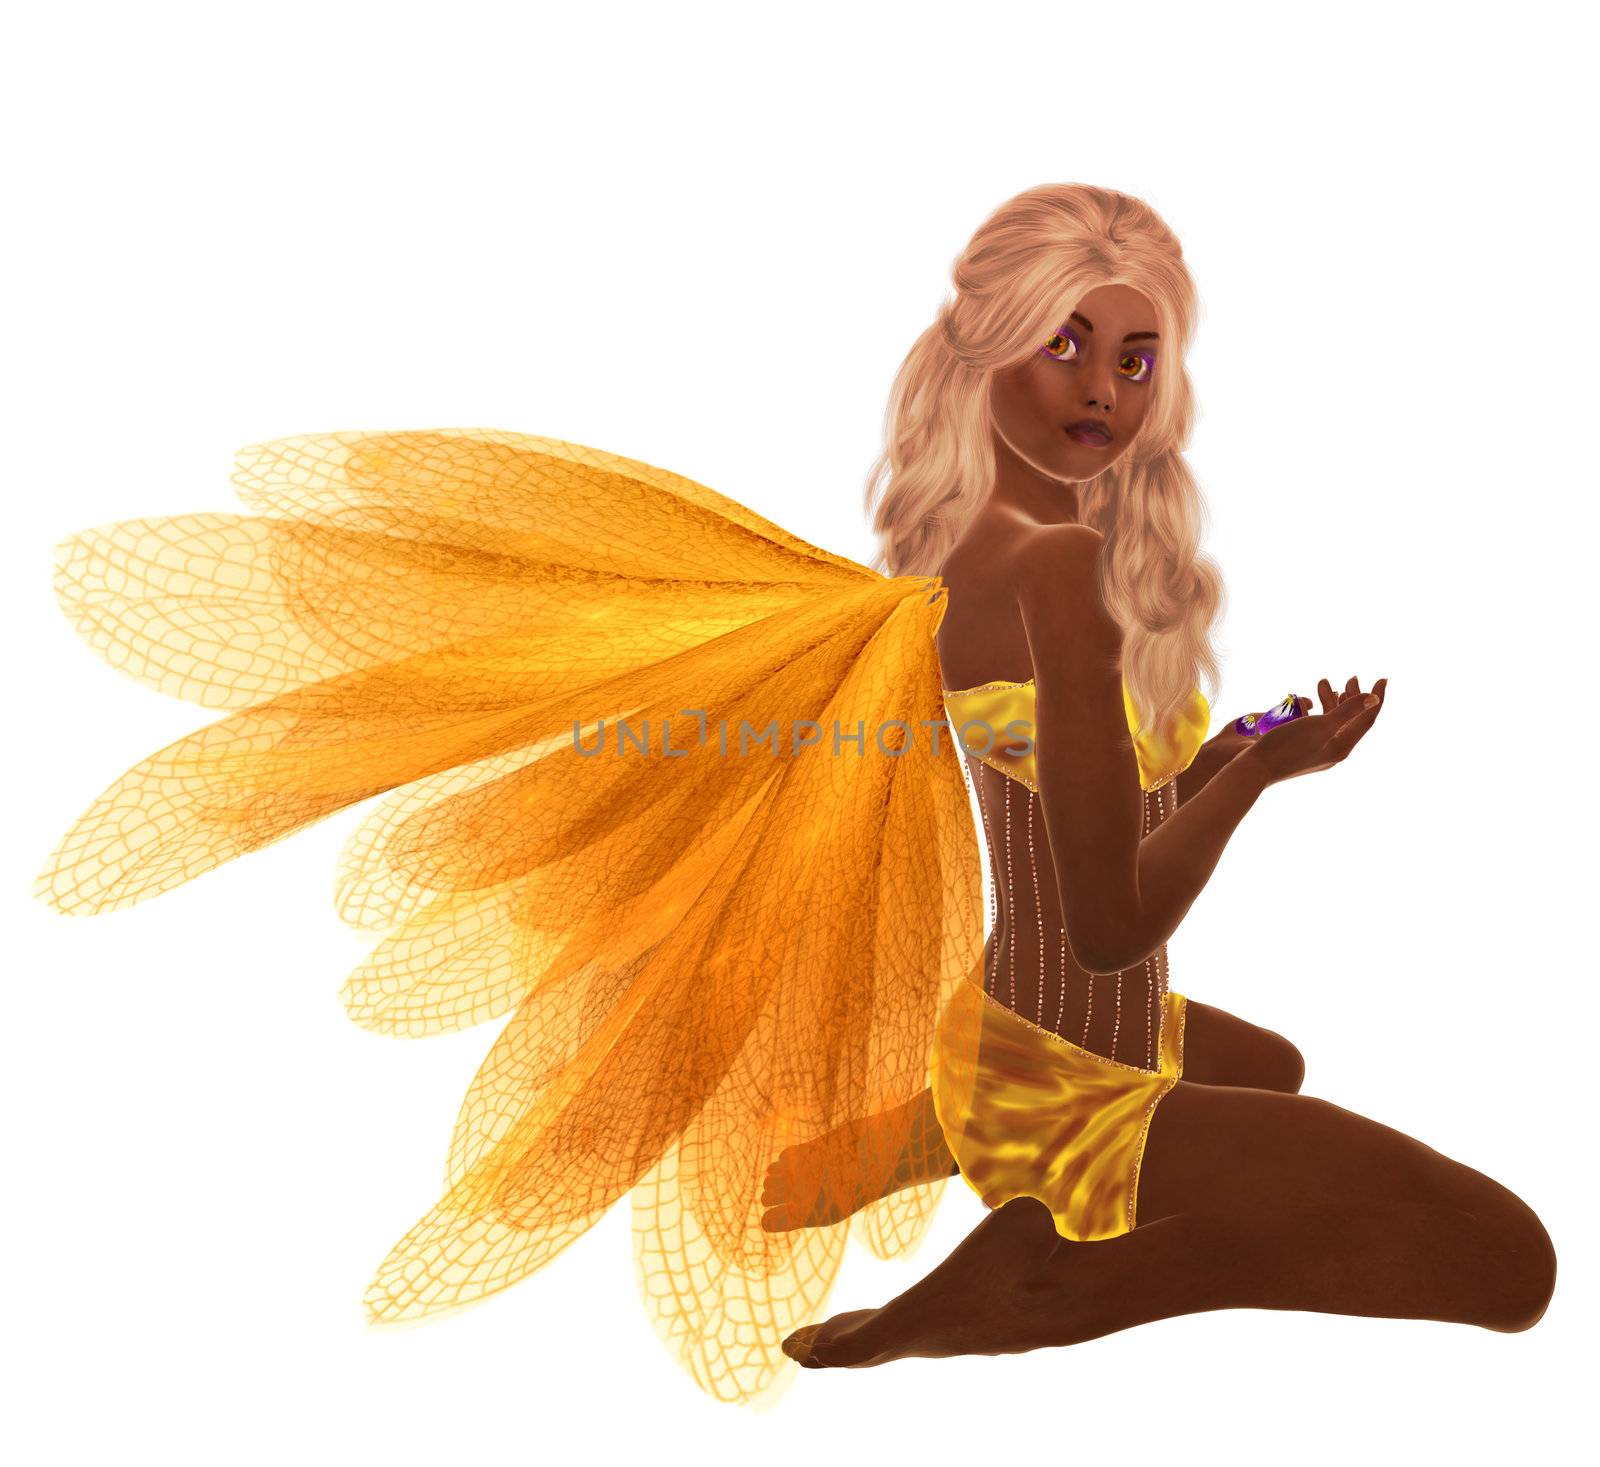 Yellow fairy with blonde hair, sitting holding flowers in her hand